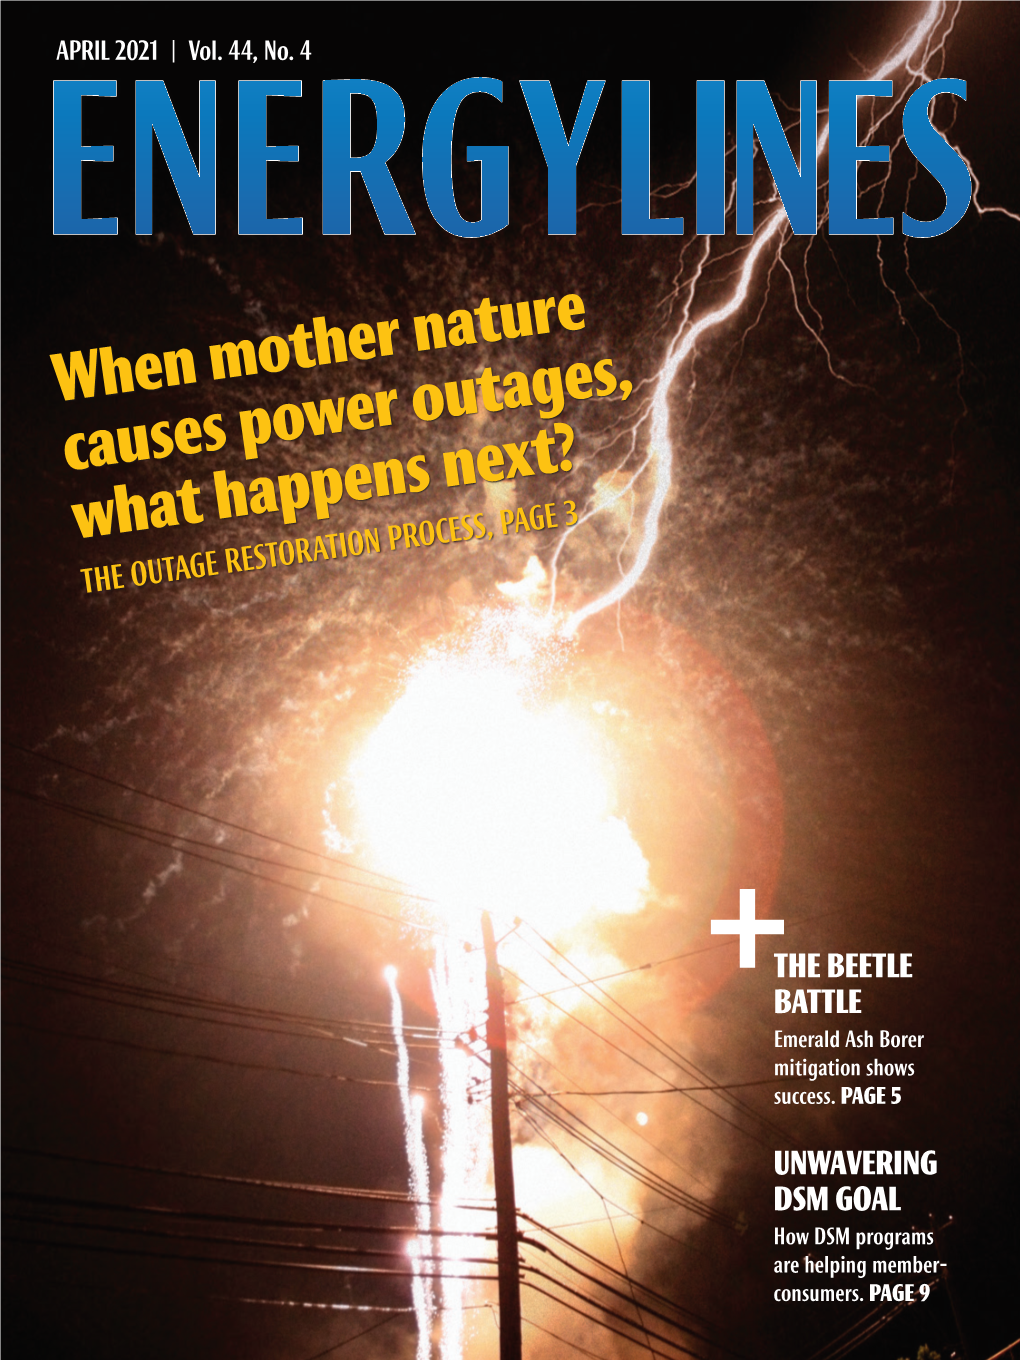 When Mother Nature Causes Power Outages, What Happens Next? the OUTAGE RESTORATION PROCESS, PAGE 3